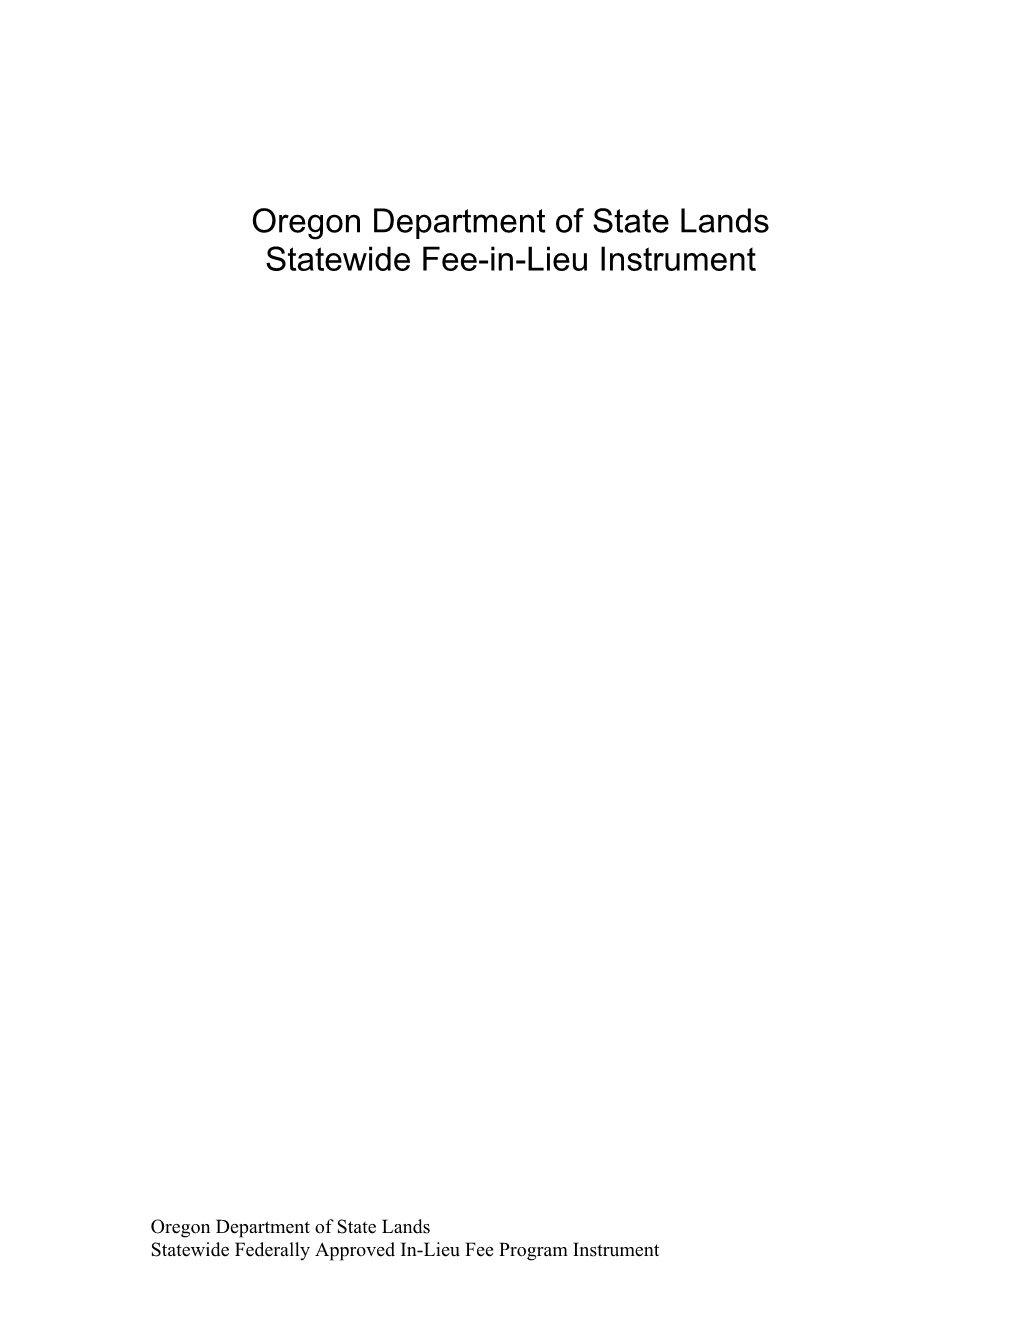 Oregon Department of State Lands Statewide Fee-In-Lieu Instrument